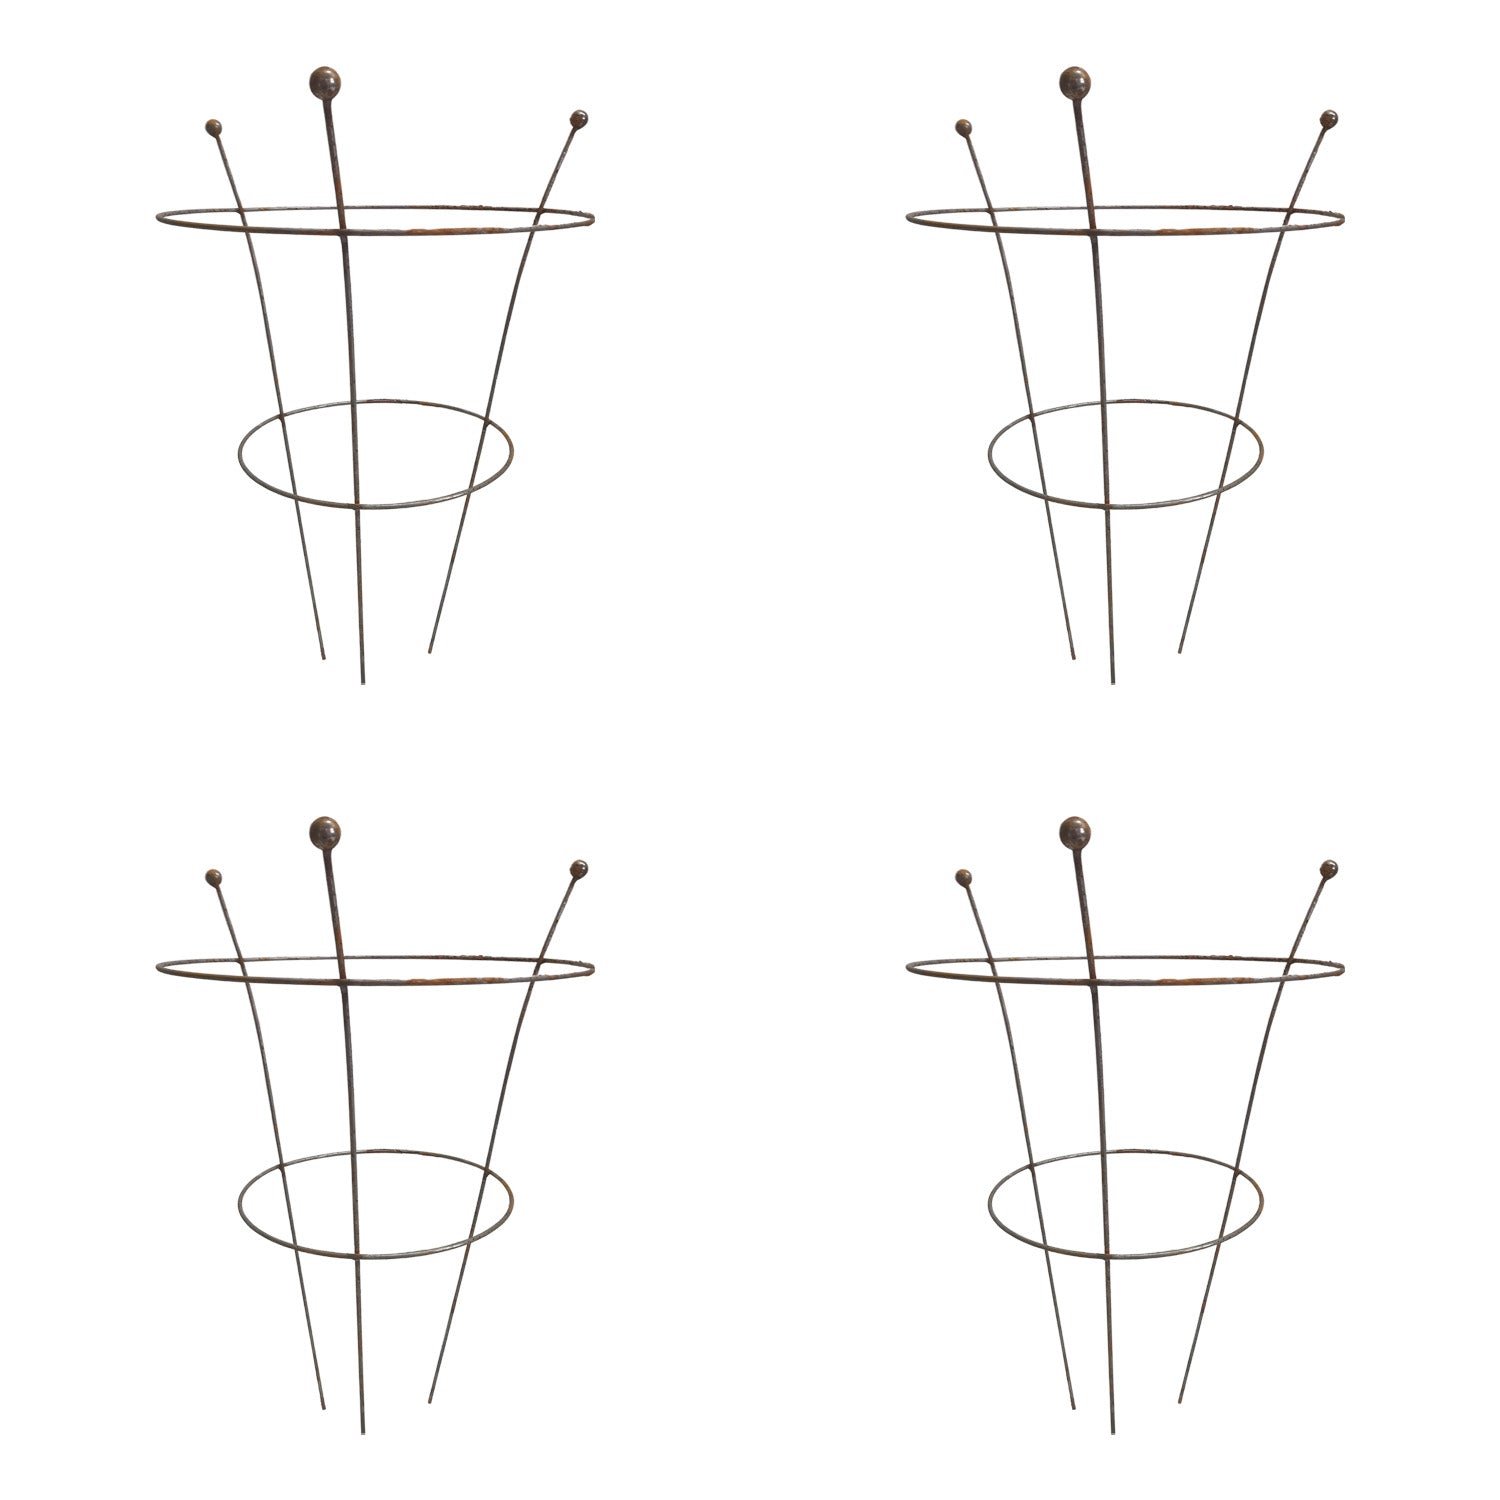 Pack of 4 Tom Chambers Herbaceous Bare Rusted Steel Garden Plant Support Medium 54cm x 40cm 